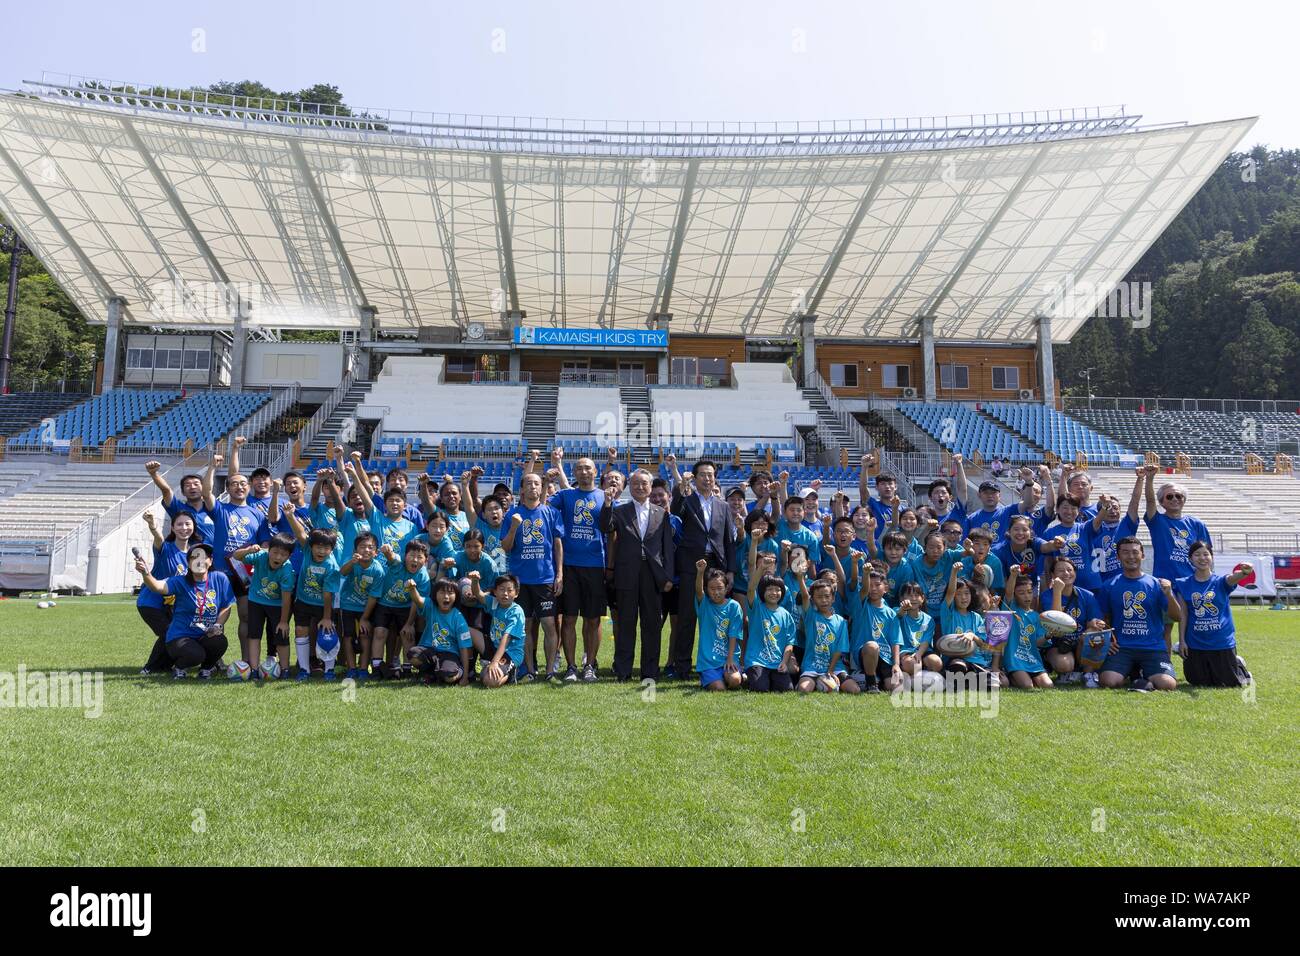 Kamaishi, Japan. 18 August 2019.  Takenori Noda Mayor of Kamaishi (C) alongside elementary-school children from Taiwan, Australia, Japan and organizers of the ''Kamaishi Kids Try'' sports event pose for the cameras at Kamaishi Unosumai Memorial Stadium. The ''Tohoku Media Tour: Iwate Course'' is organized by the Tokyo Metropolitan Government in collaboration with local authorities to showcase the recovery efforts in Tohoku area affected by the 2011 Great East Japan Earthquake and Tsunami. The Kamaishi Unosumai Memorial Stadium or Kamaishi Recovery Memorial Stadium will host the Fiji V Uruguay  Stock Photo